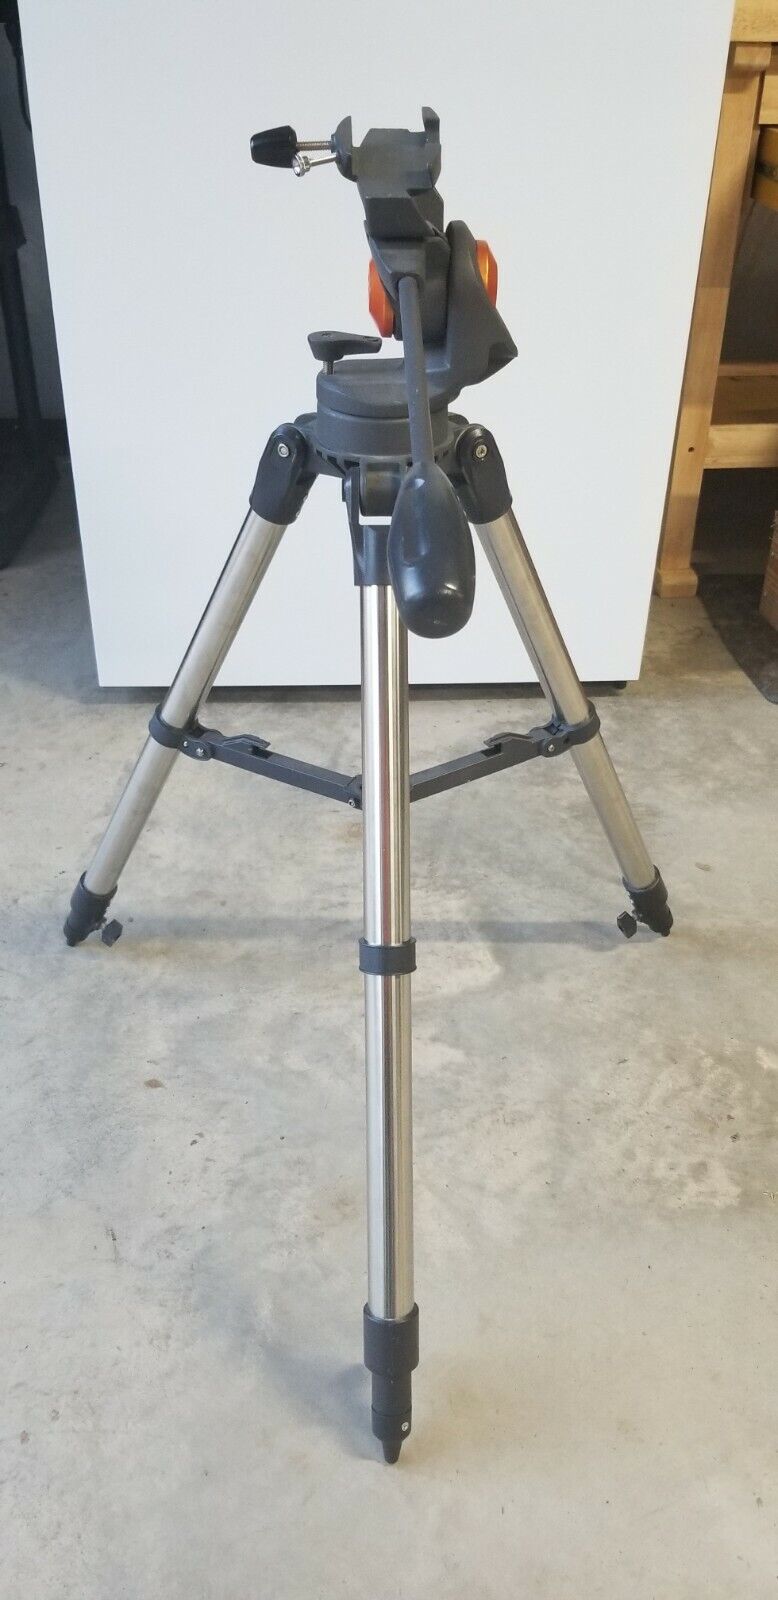 Grab N Go Telescope Tripod For Dovetail Equipped Telescope Stainless Legs